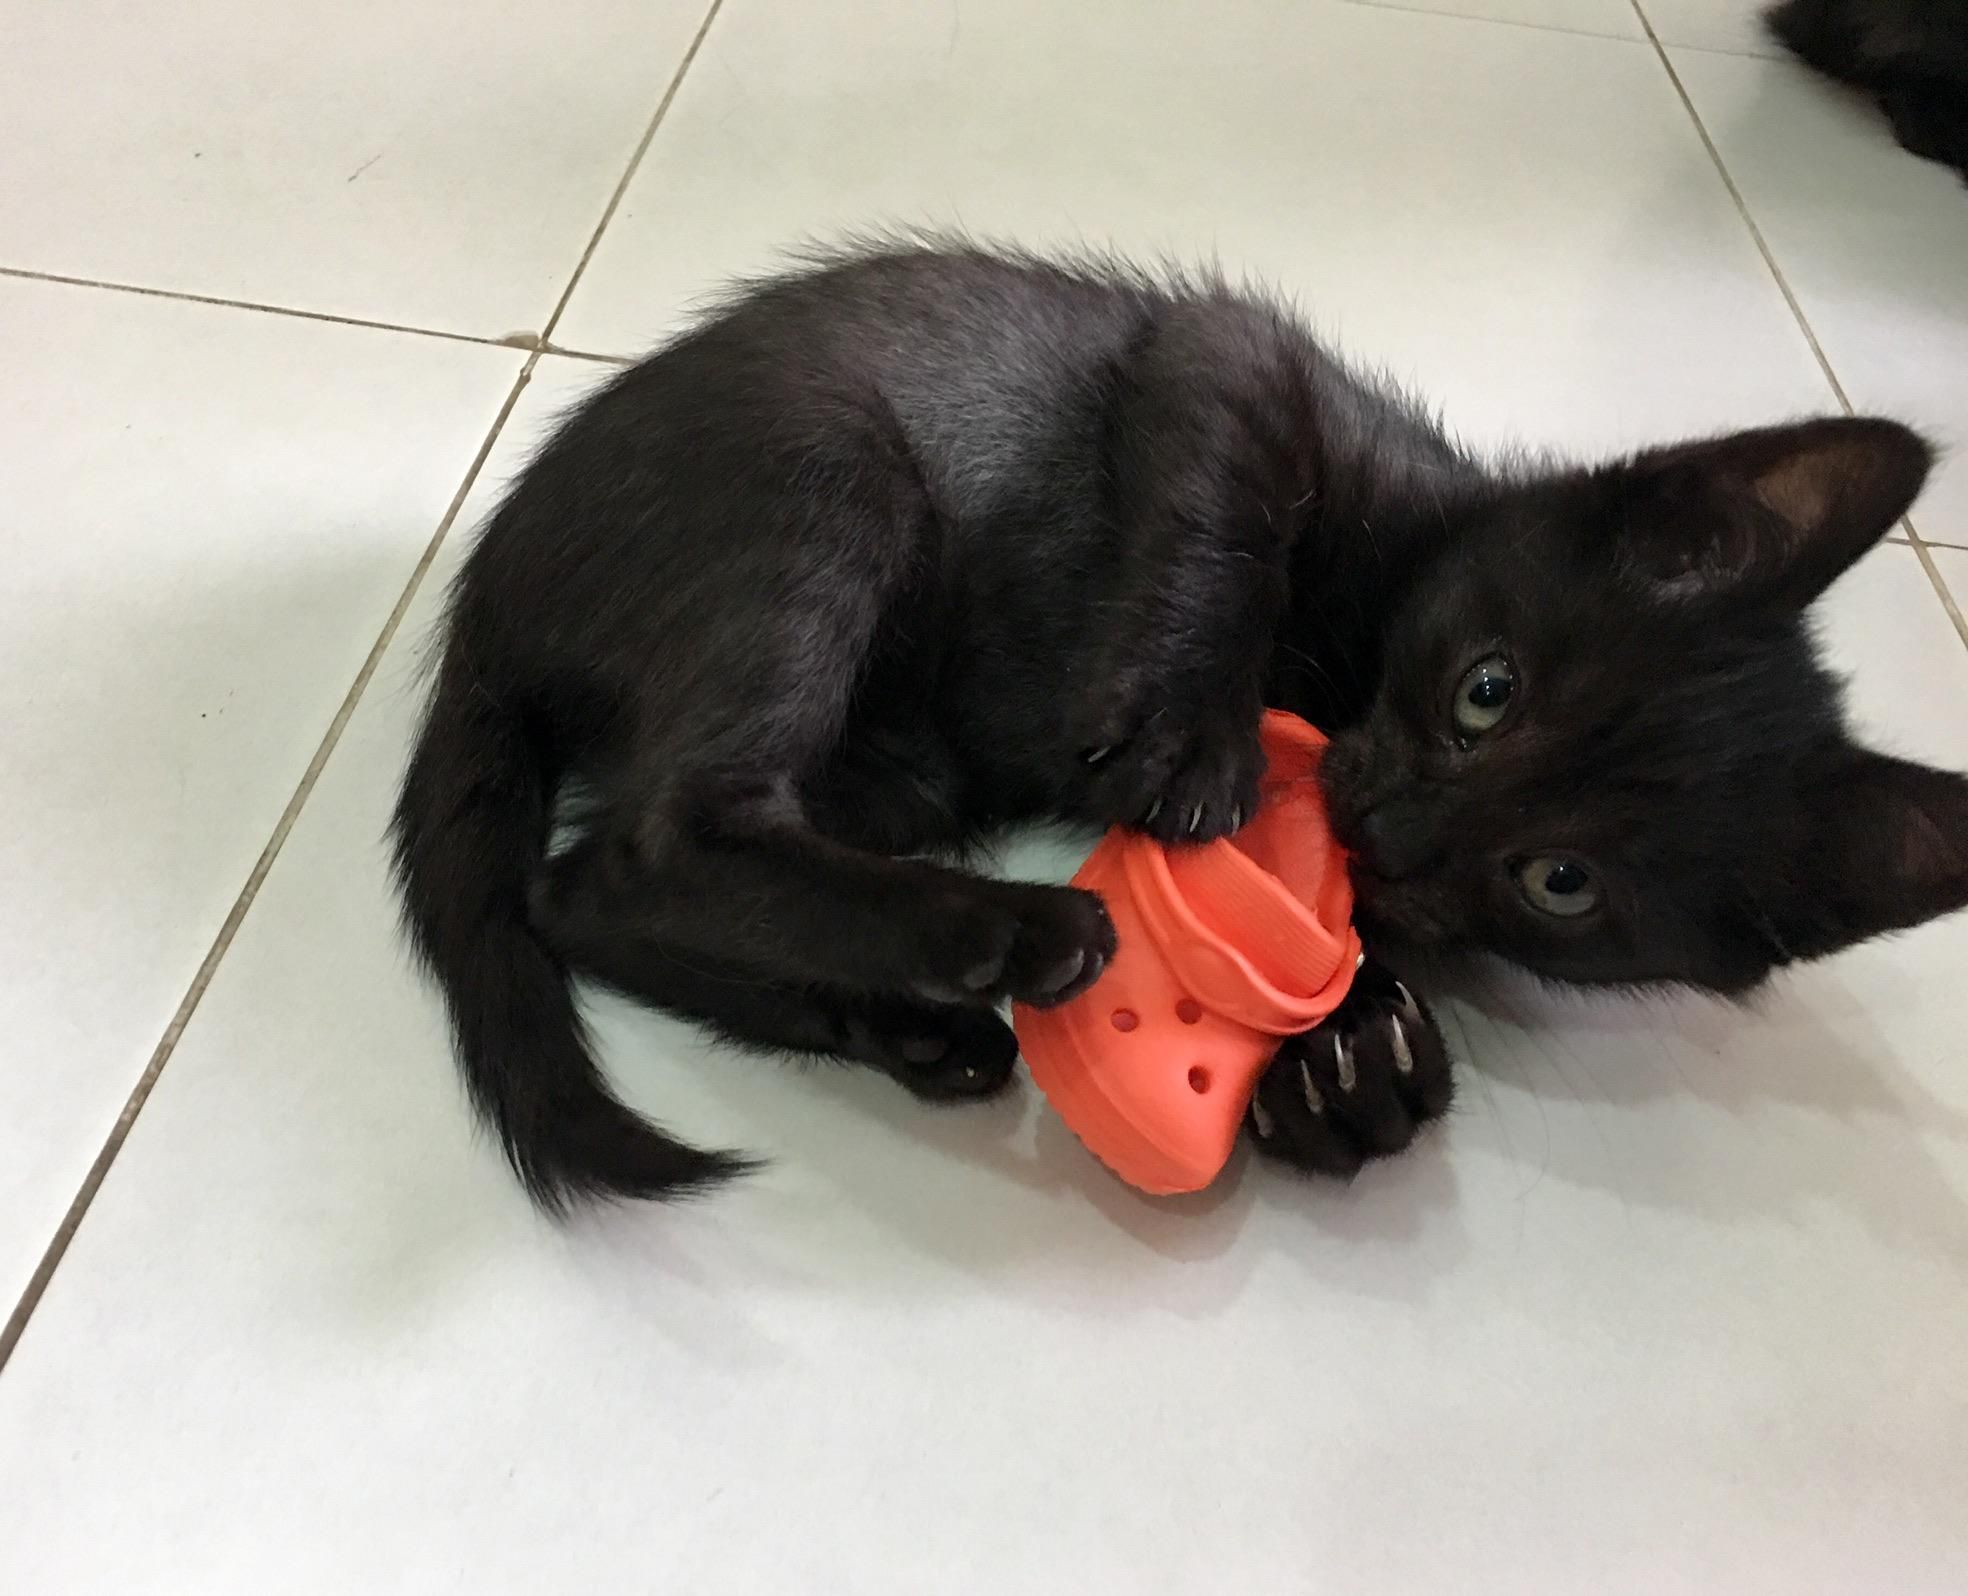 Giant panther attacks helpless baby croc